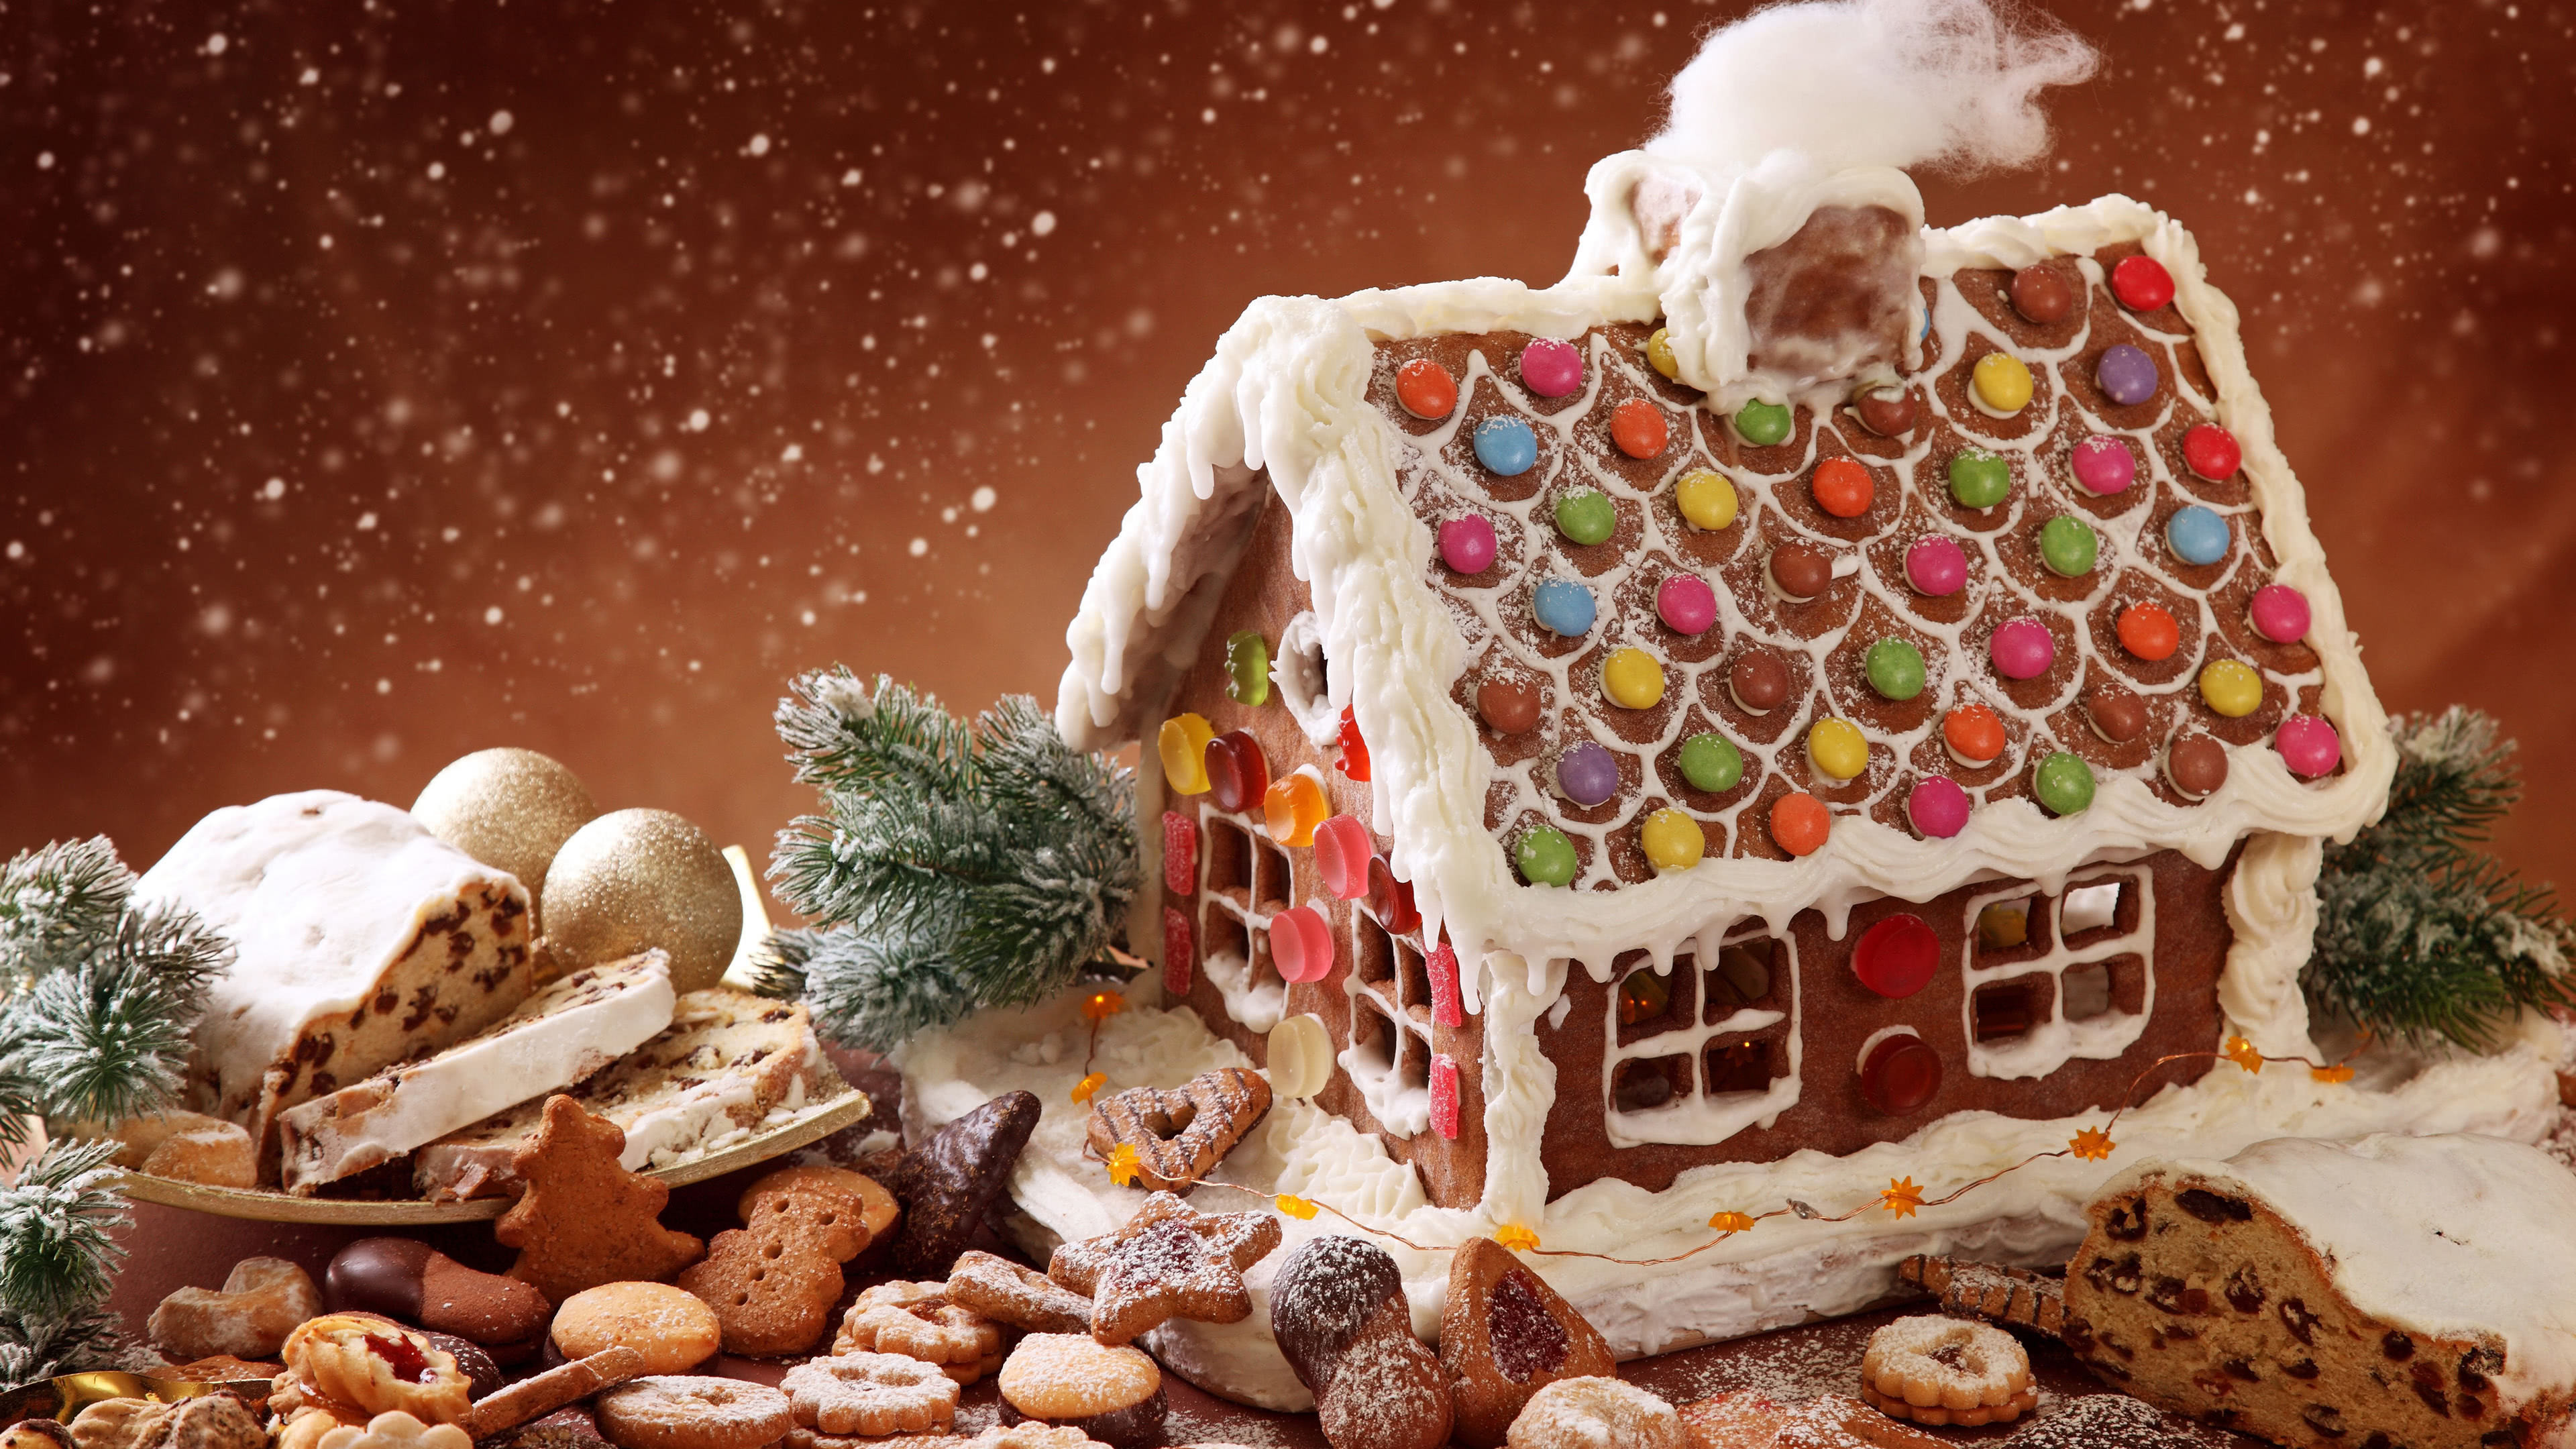 gray and beige concrete house during daytime gingerbread house teams background